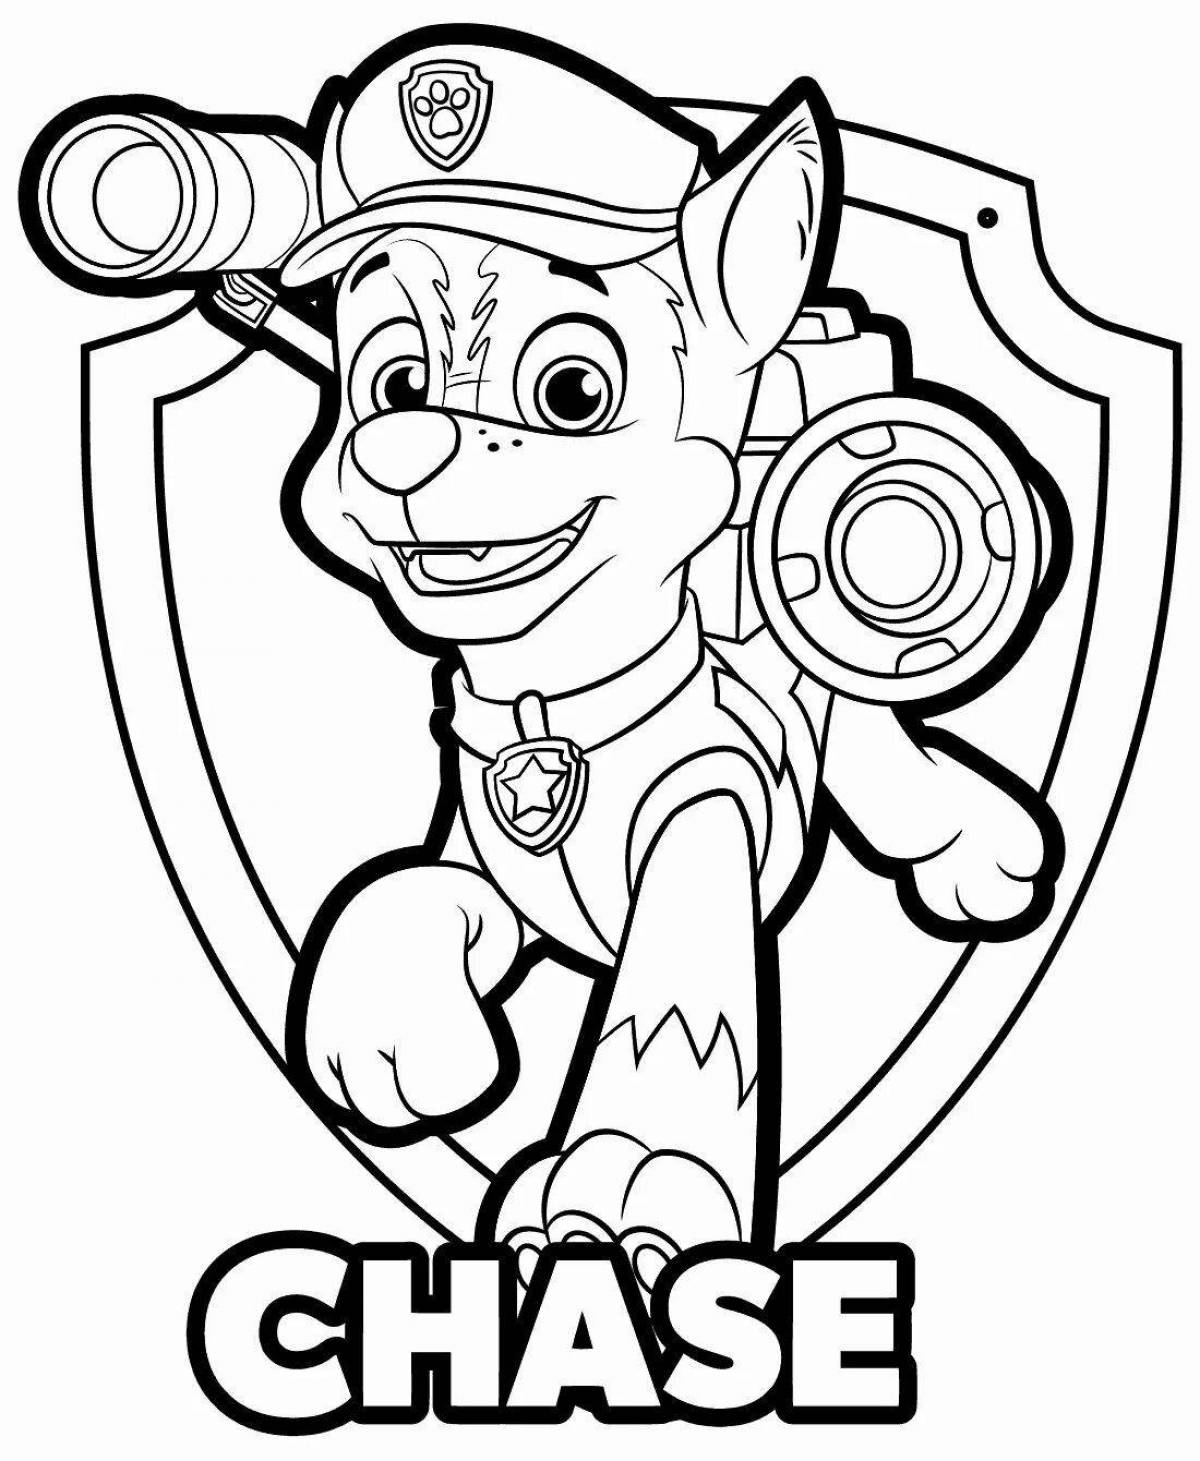 Paw Patrol playful coloring page for boys